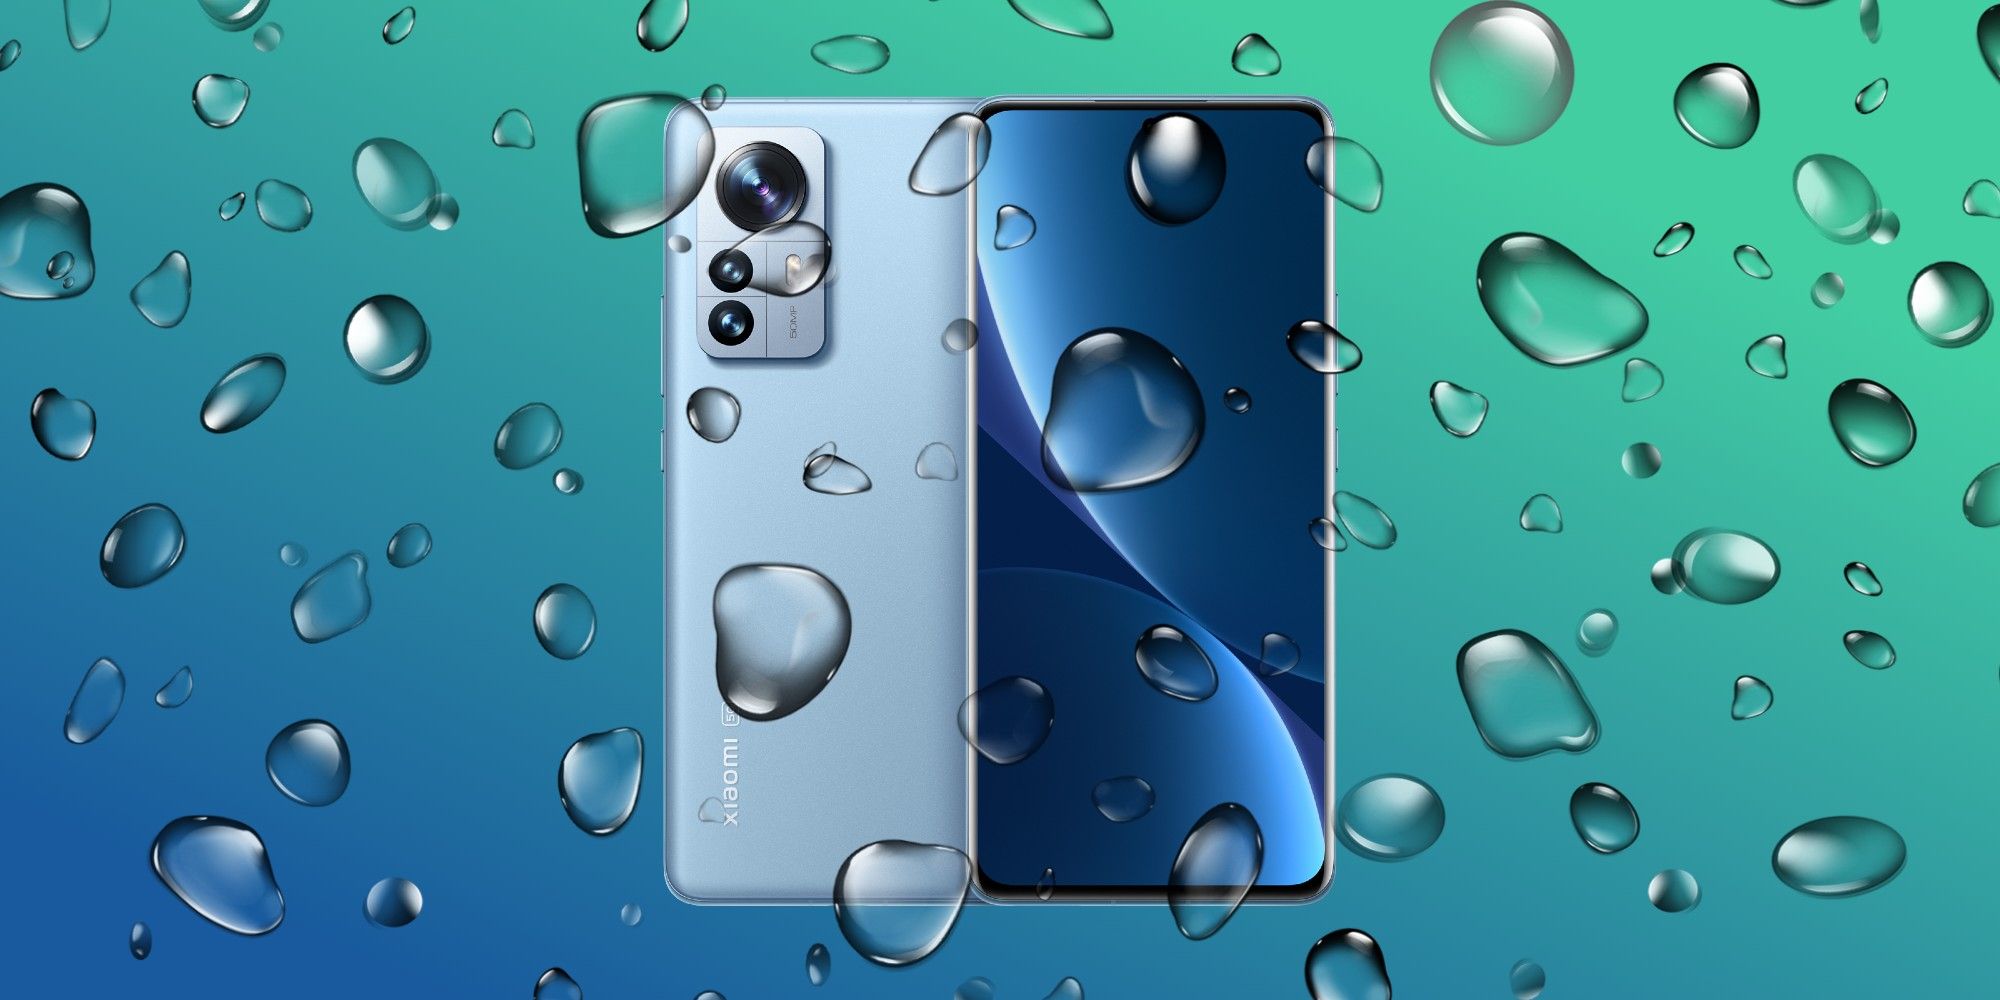 Xiaomi 12 Pro smartphone covered in water droplets